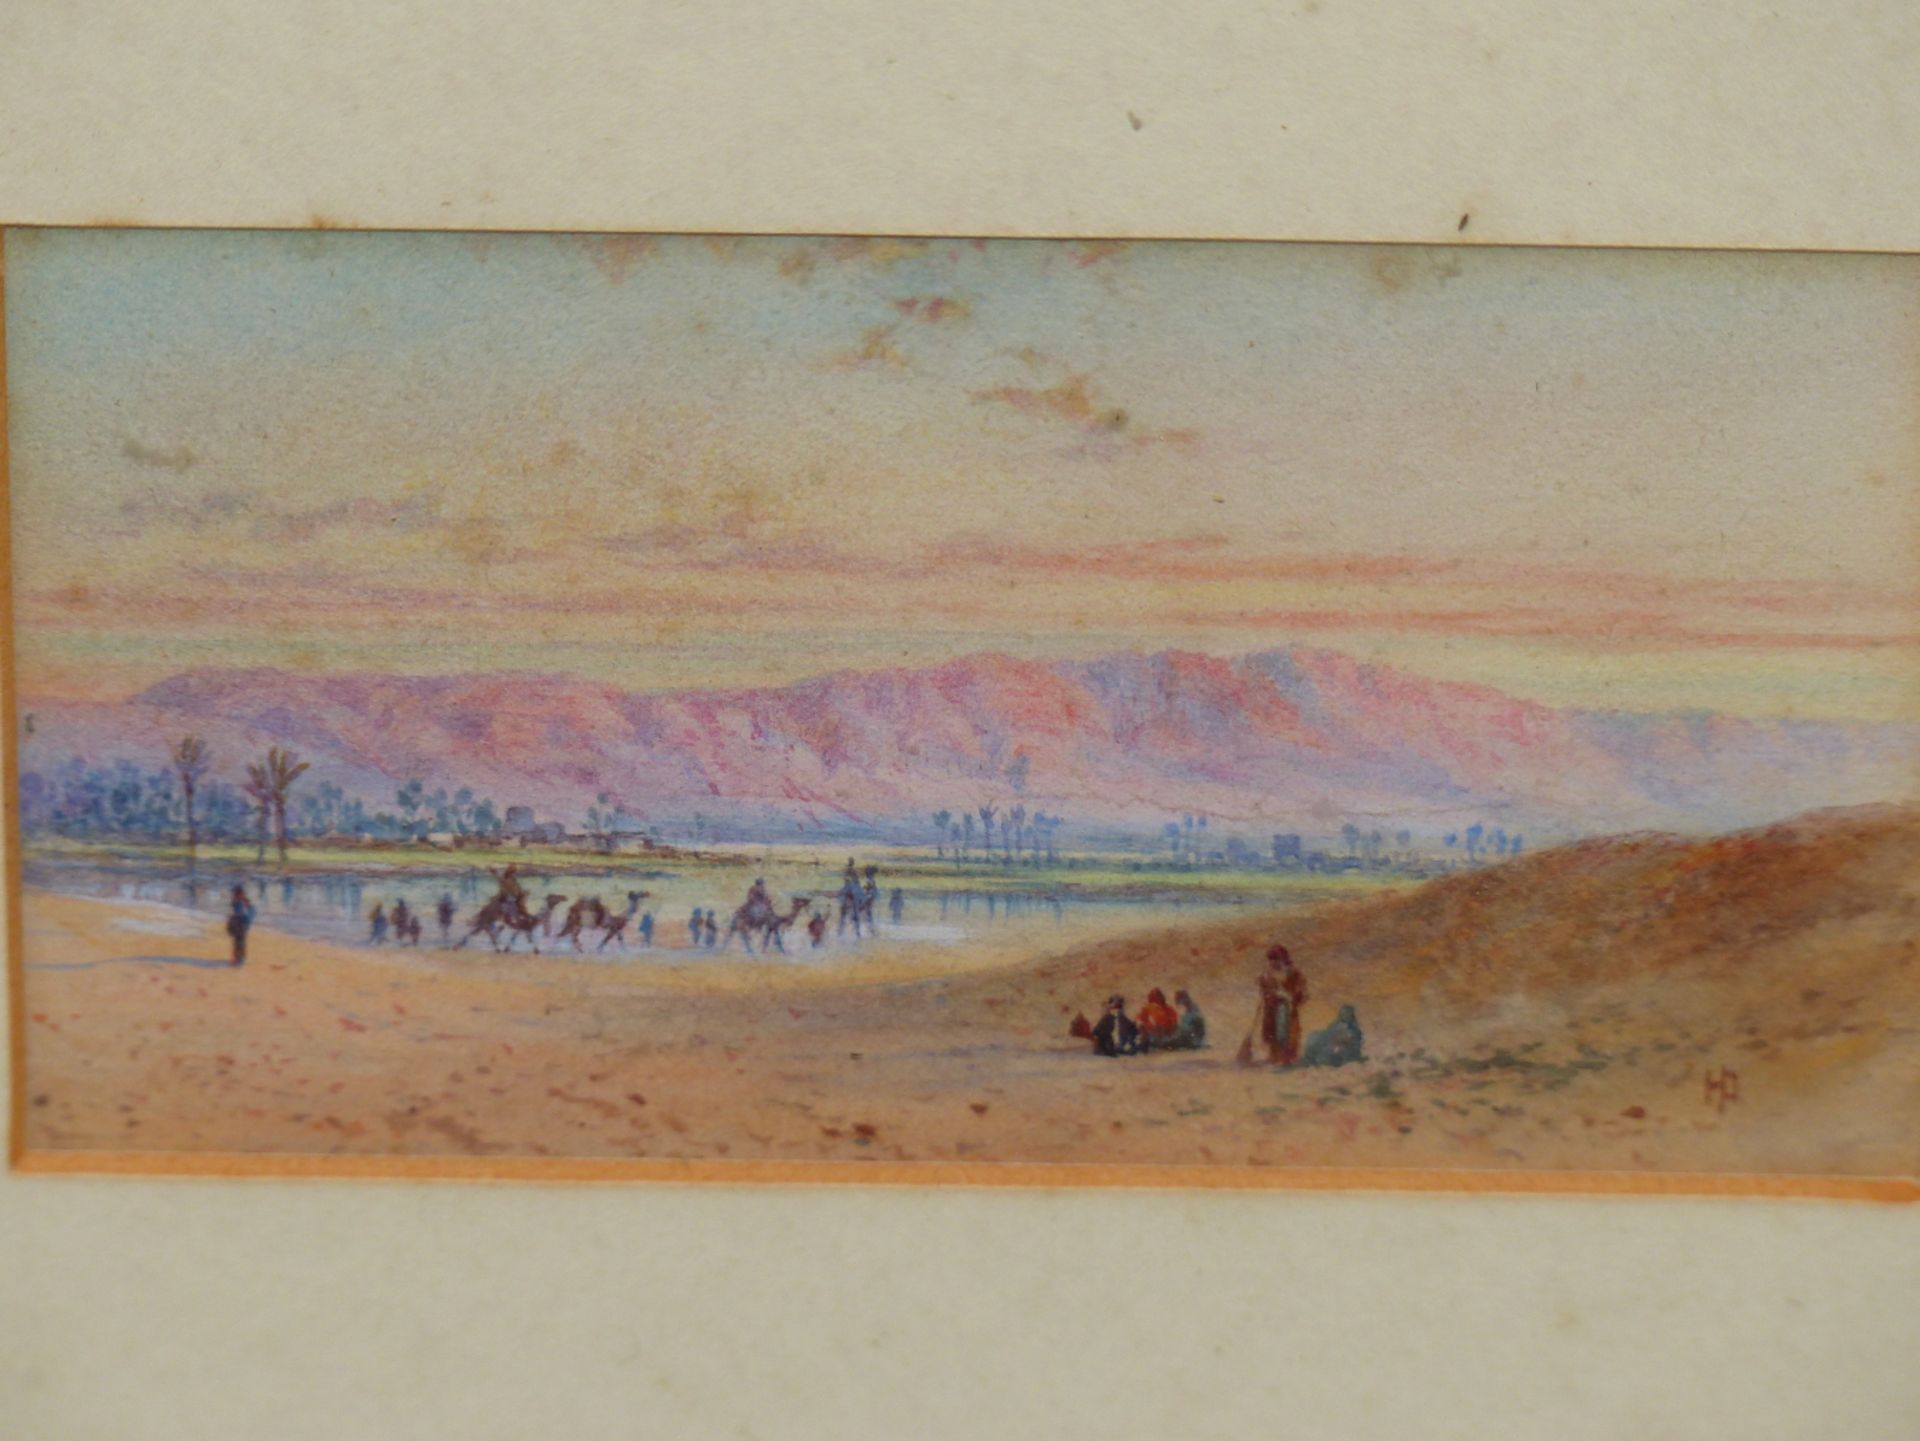 HENRY PILLEAU (1813-1899), THE MOCATTAM MOUNTAINS NEAR CAIRO, EGYPT, SIGNED WITH MONOGRAM,